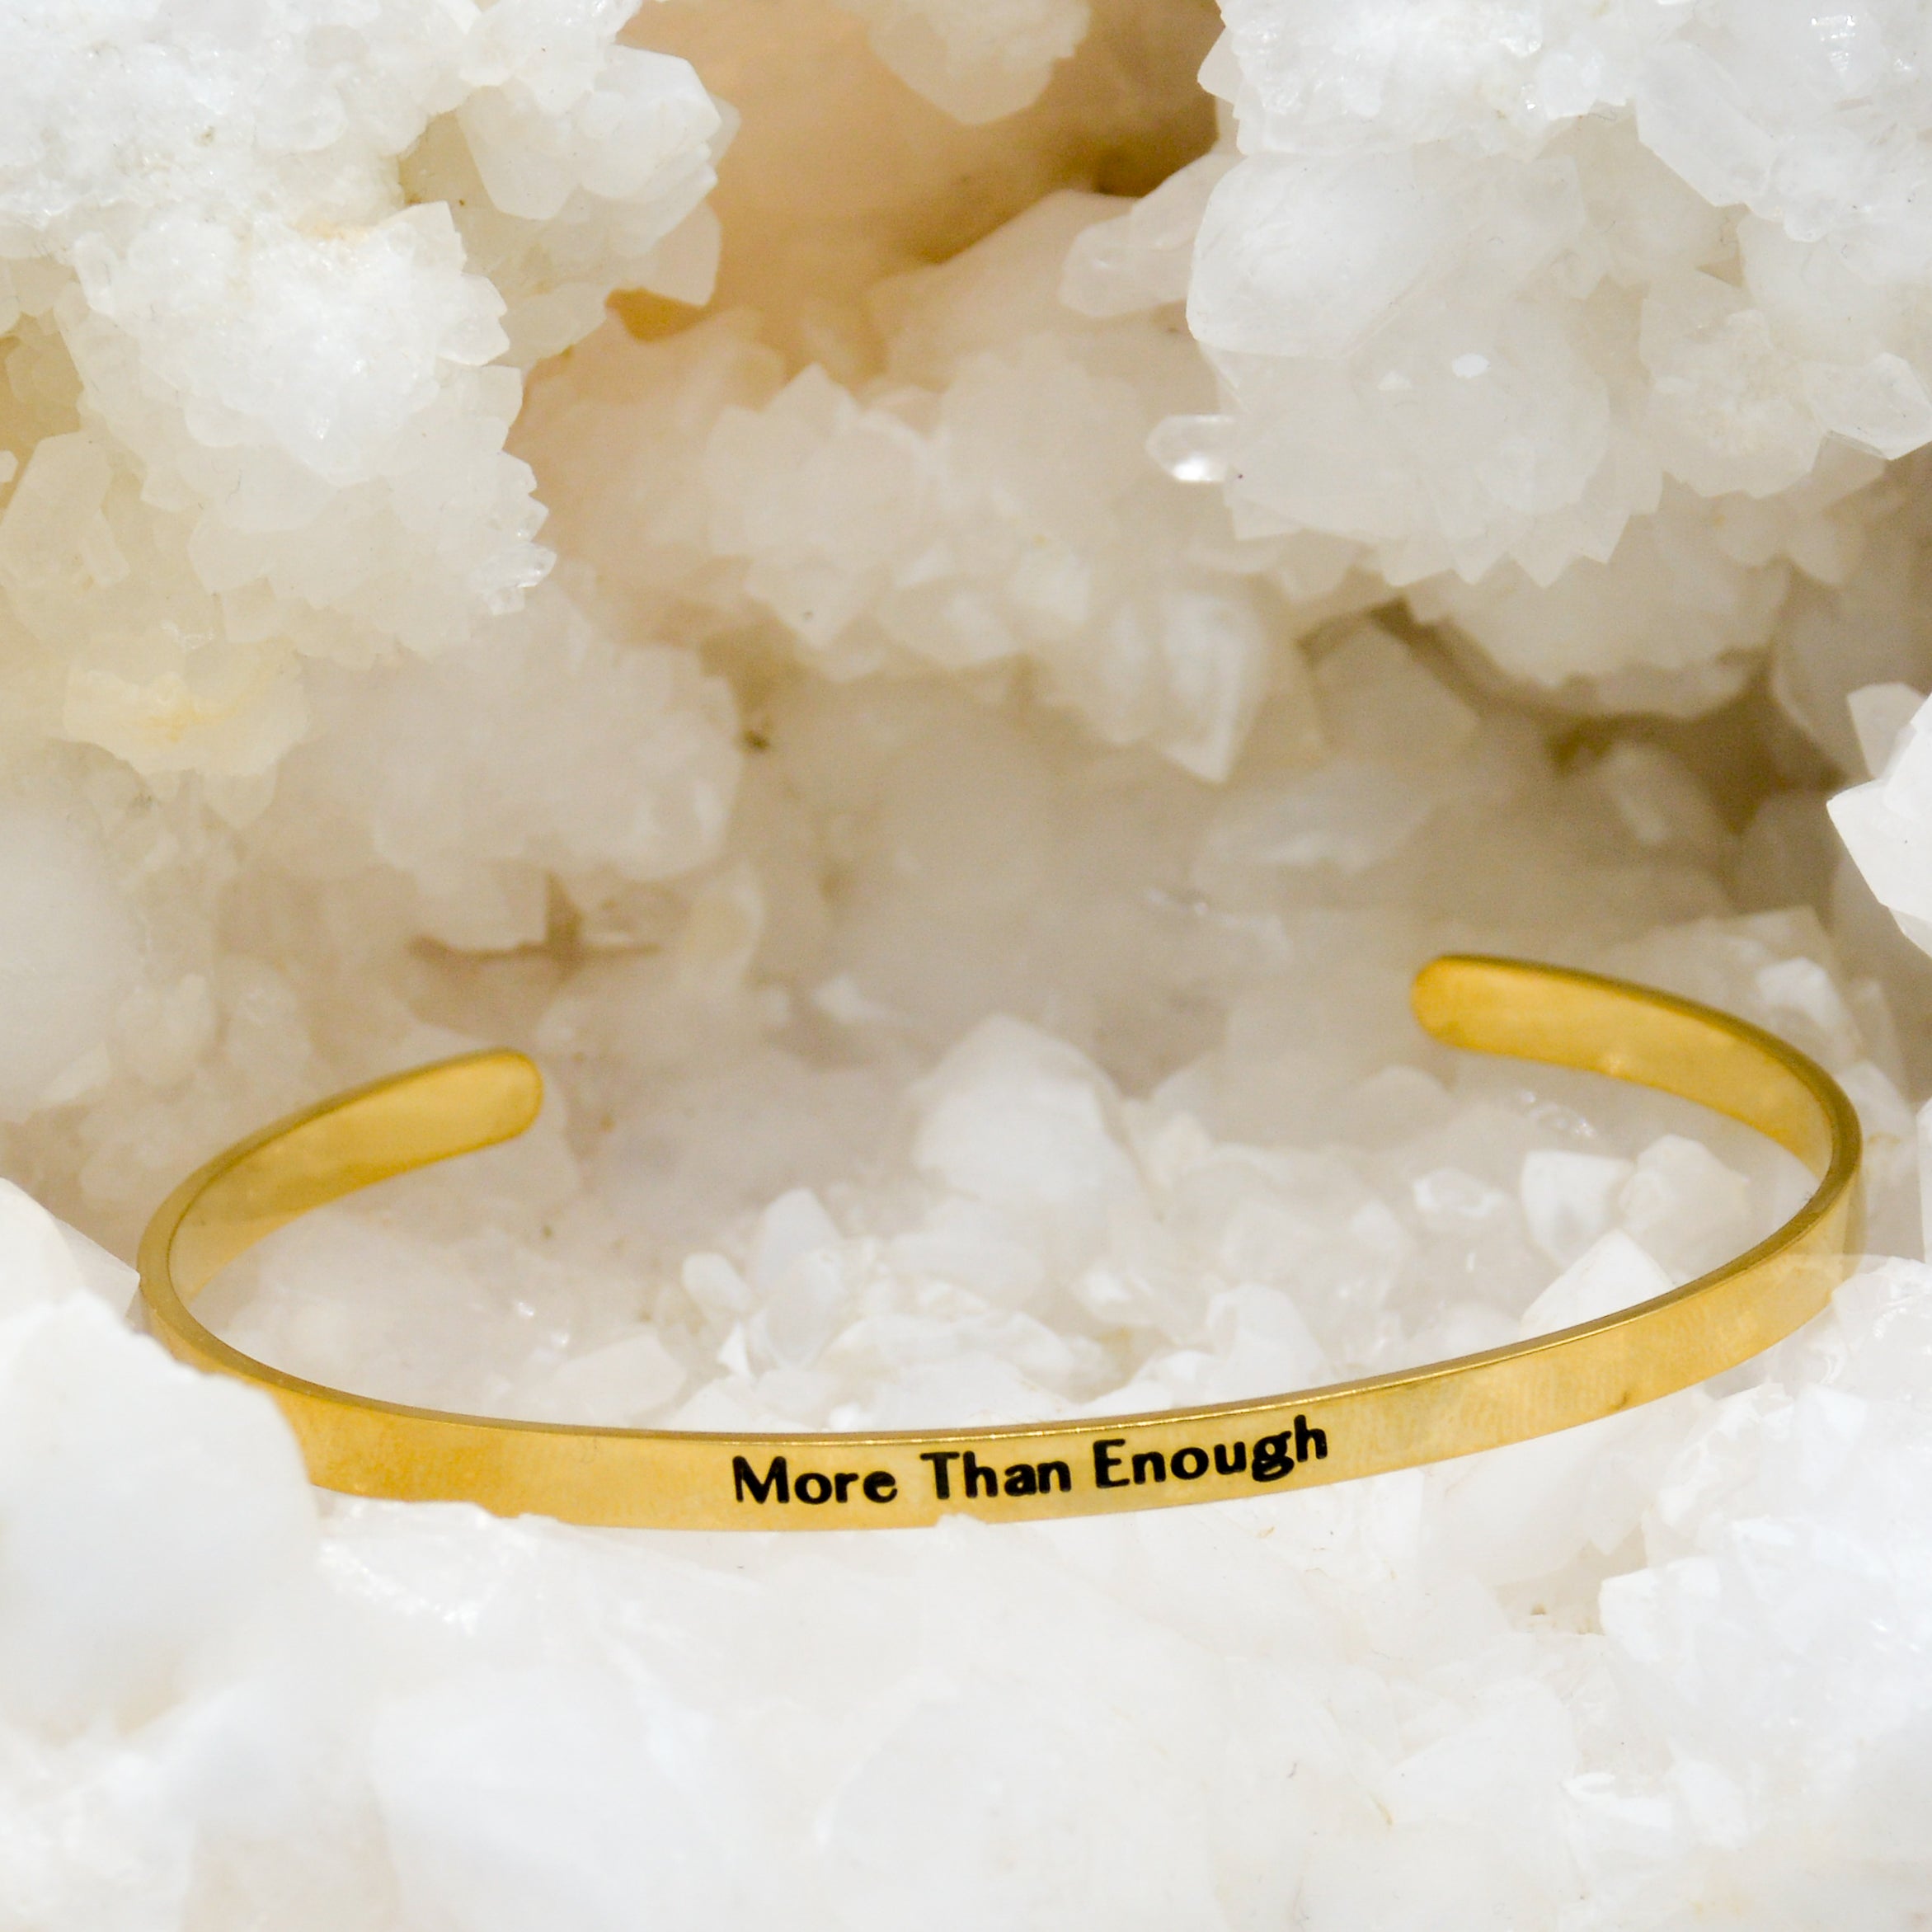 Echoes of Empowerment - Petite Stainless Steel Bracelets by Faith2Felicity